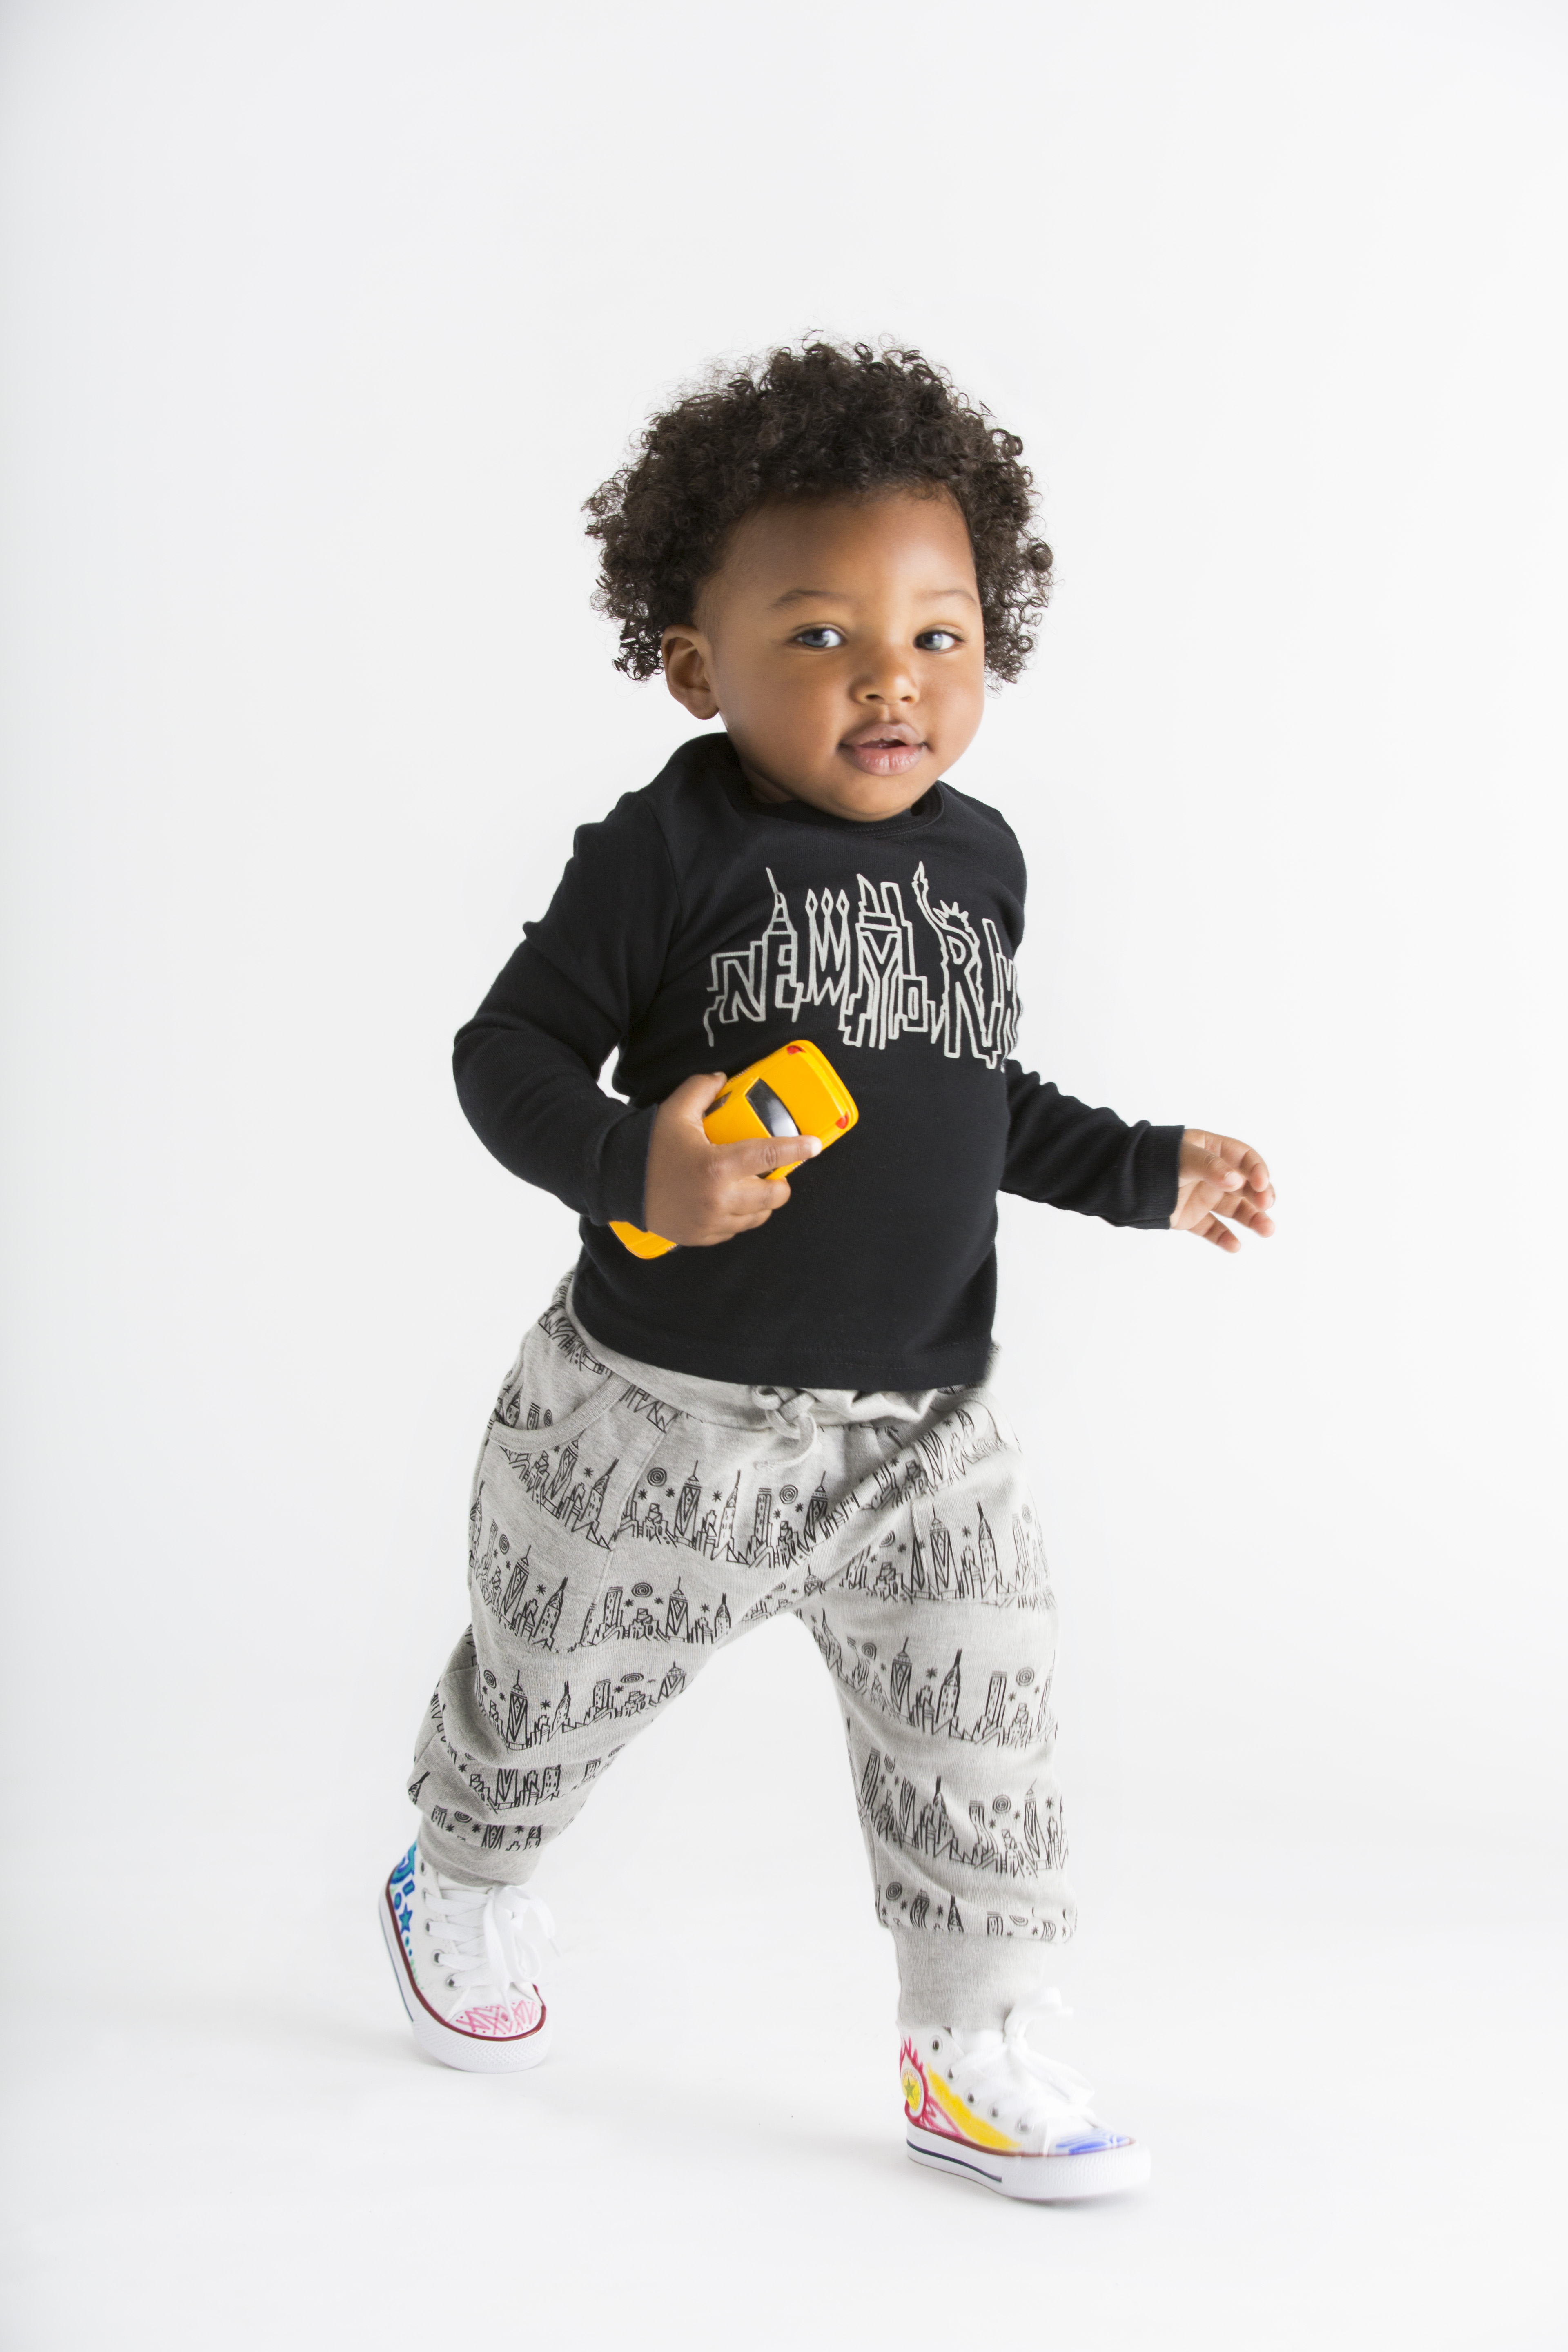 Lucky Jade Launches Fall 2016 Collection of High End Baby Clothes